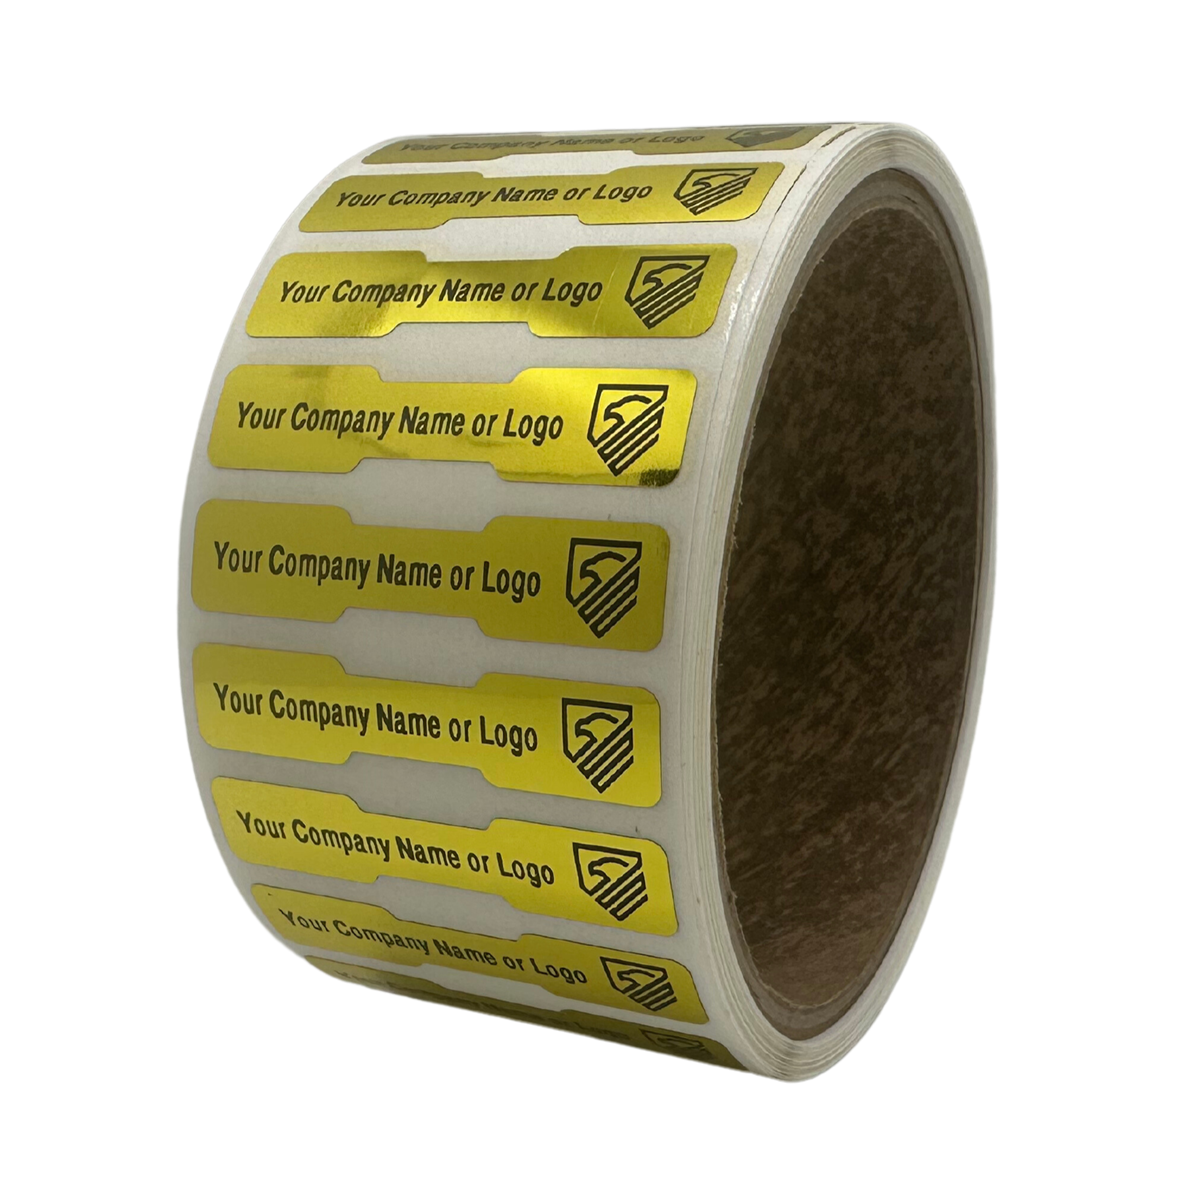 1,000 Tamper Evident Security Labels Gold TamperVoidPro Seal Sticker, Dogbone Shape Size 1.75" x 0.375 (44mm x 9mm). Custom Printed. >Click on item details to customize.